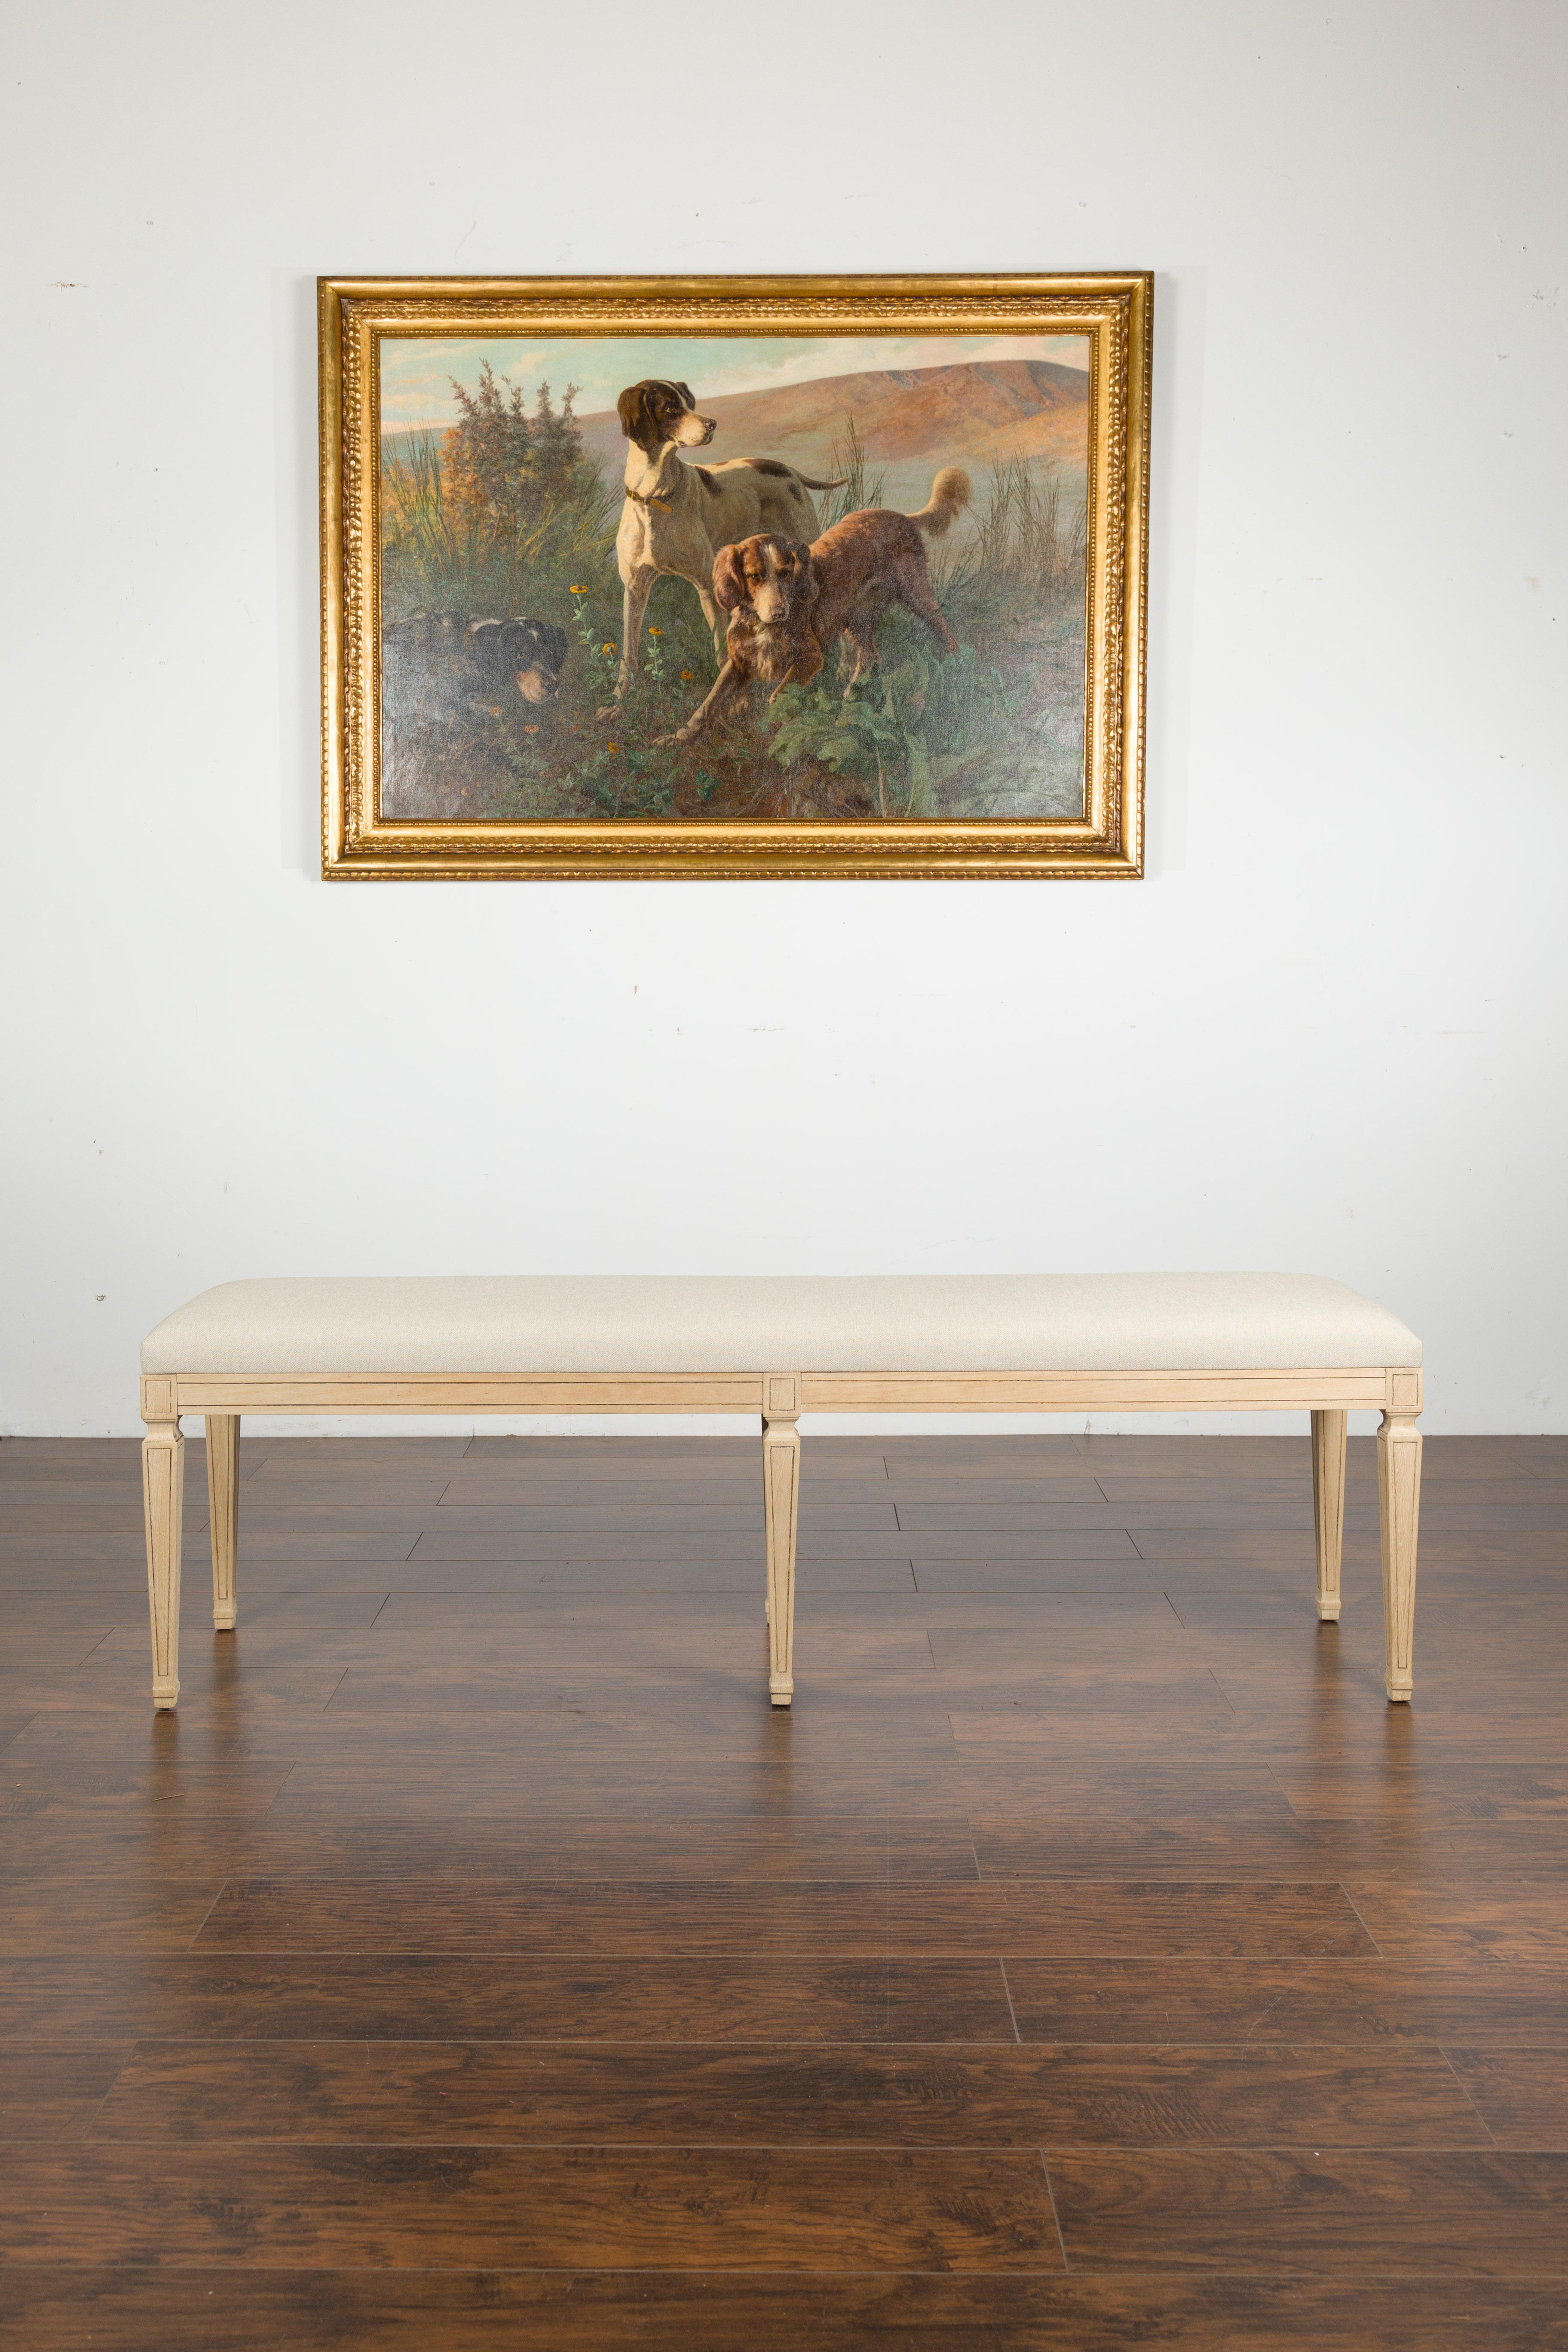 A French vintage Neoclassical style bleached wood bench from the 20th century, with new upholstery and tapered legs. Created in France during the midcentury period, this Neoclassical style bench features a long rectangular seat, newly recovered with